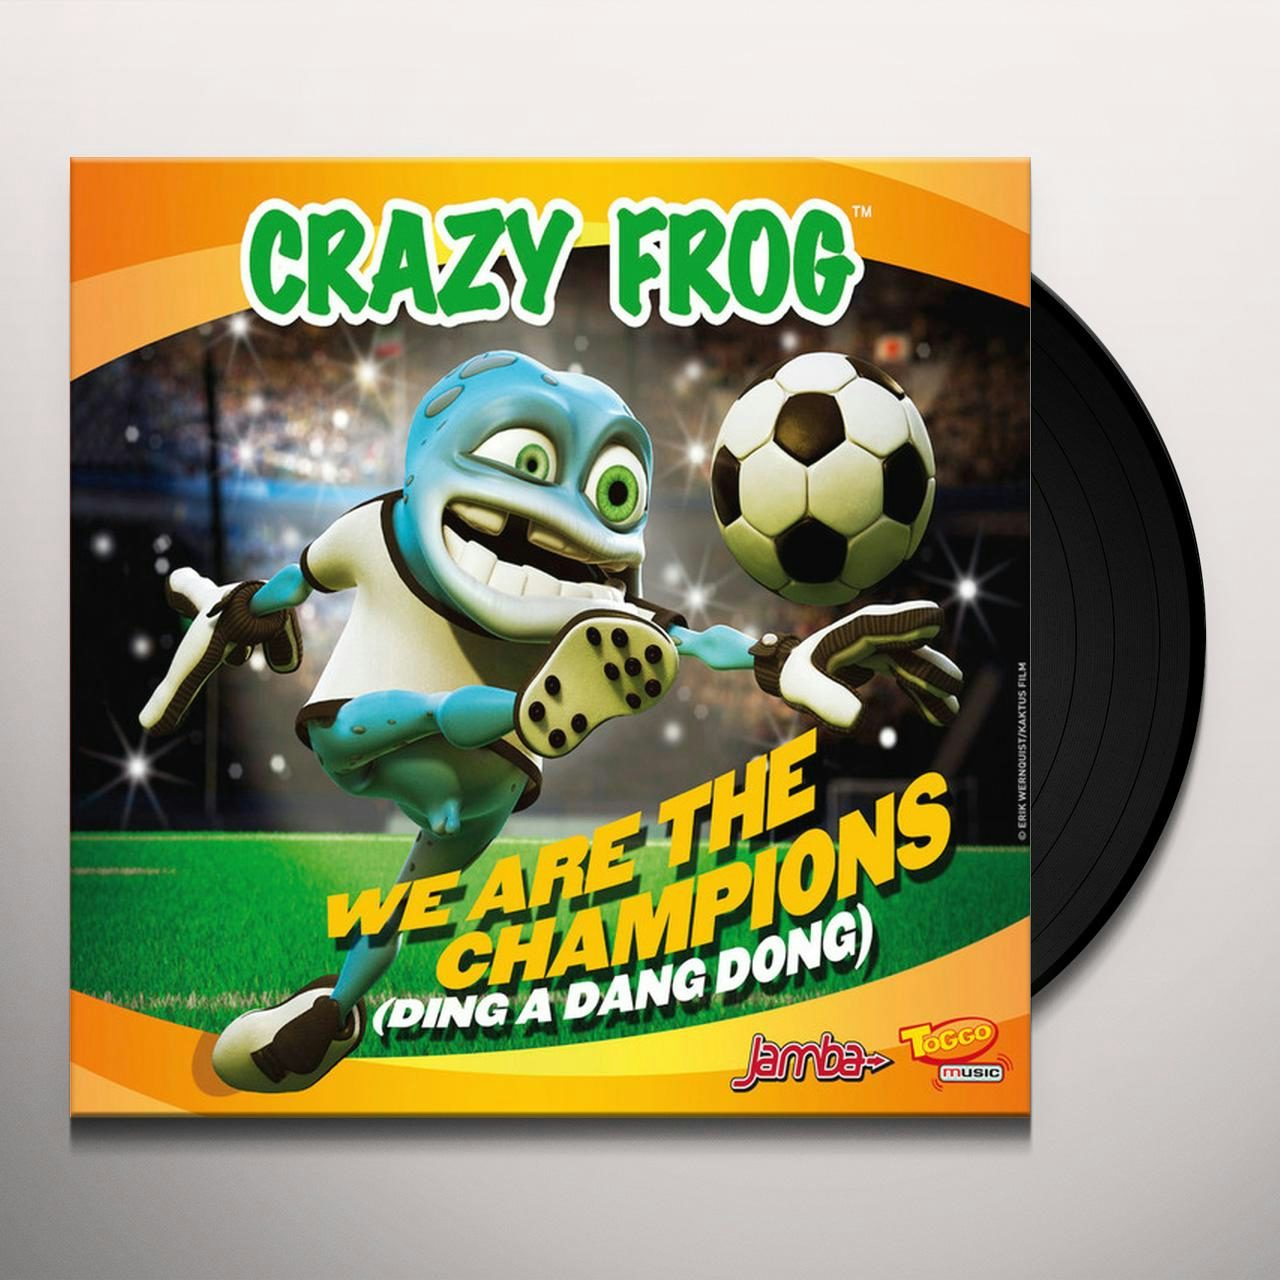 we are the champions crazy frog